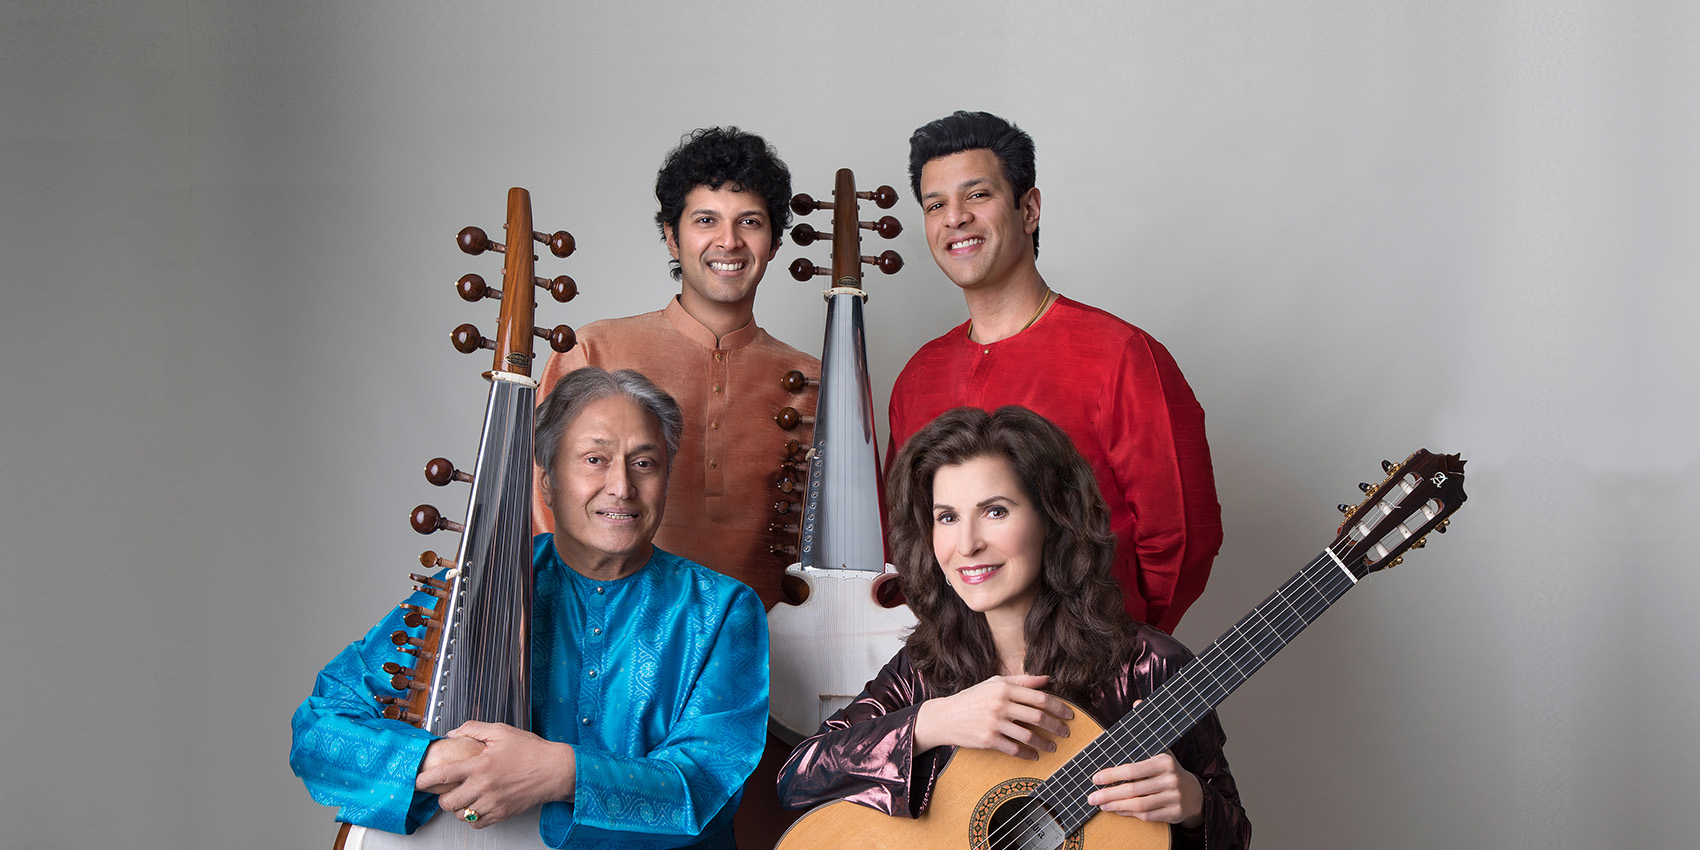 Four performers pose with their string instruments against a neutral background